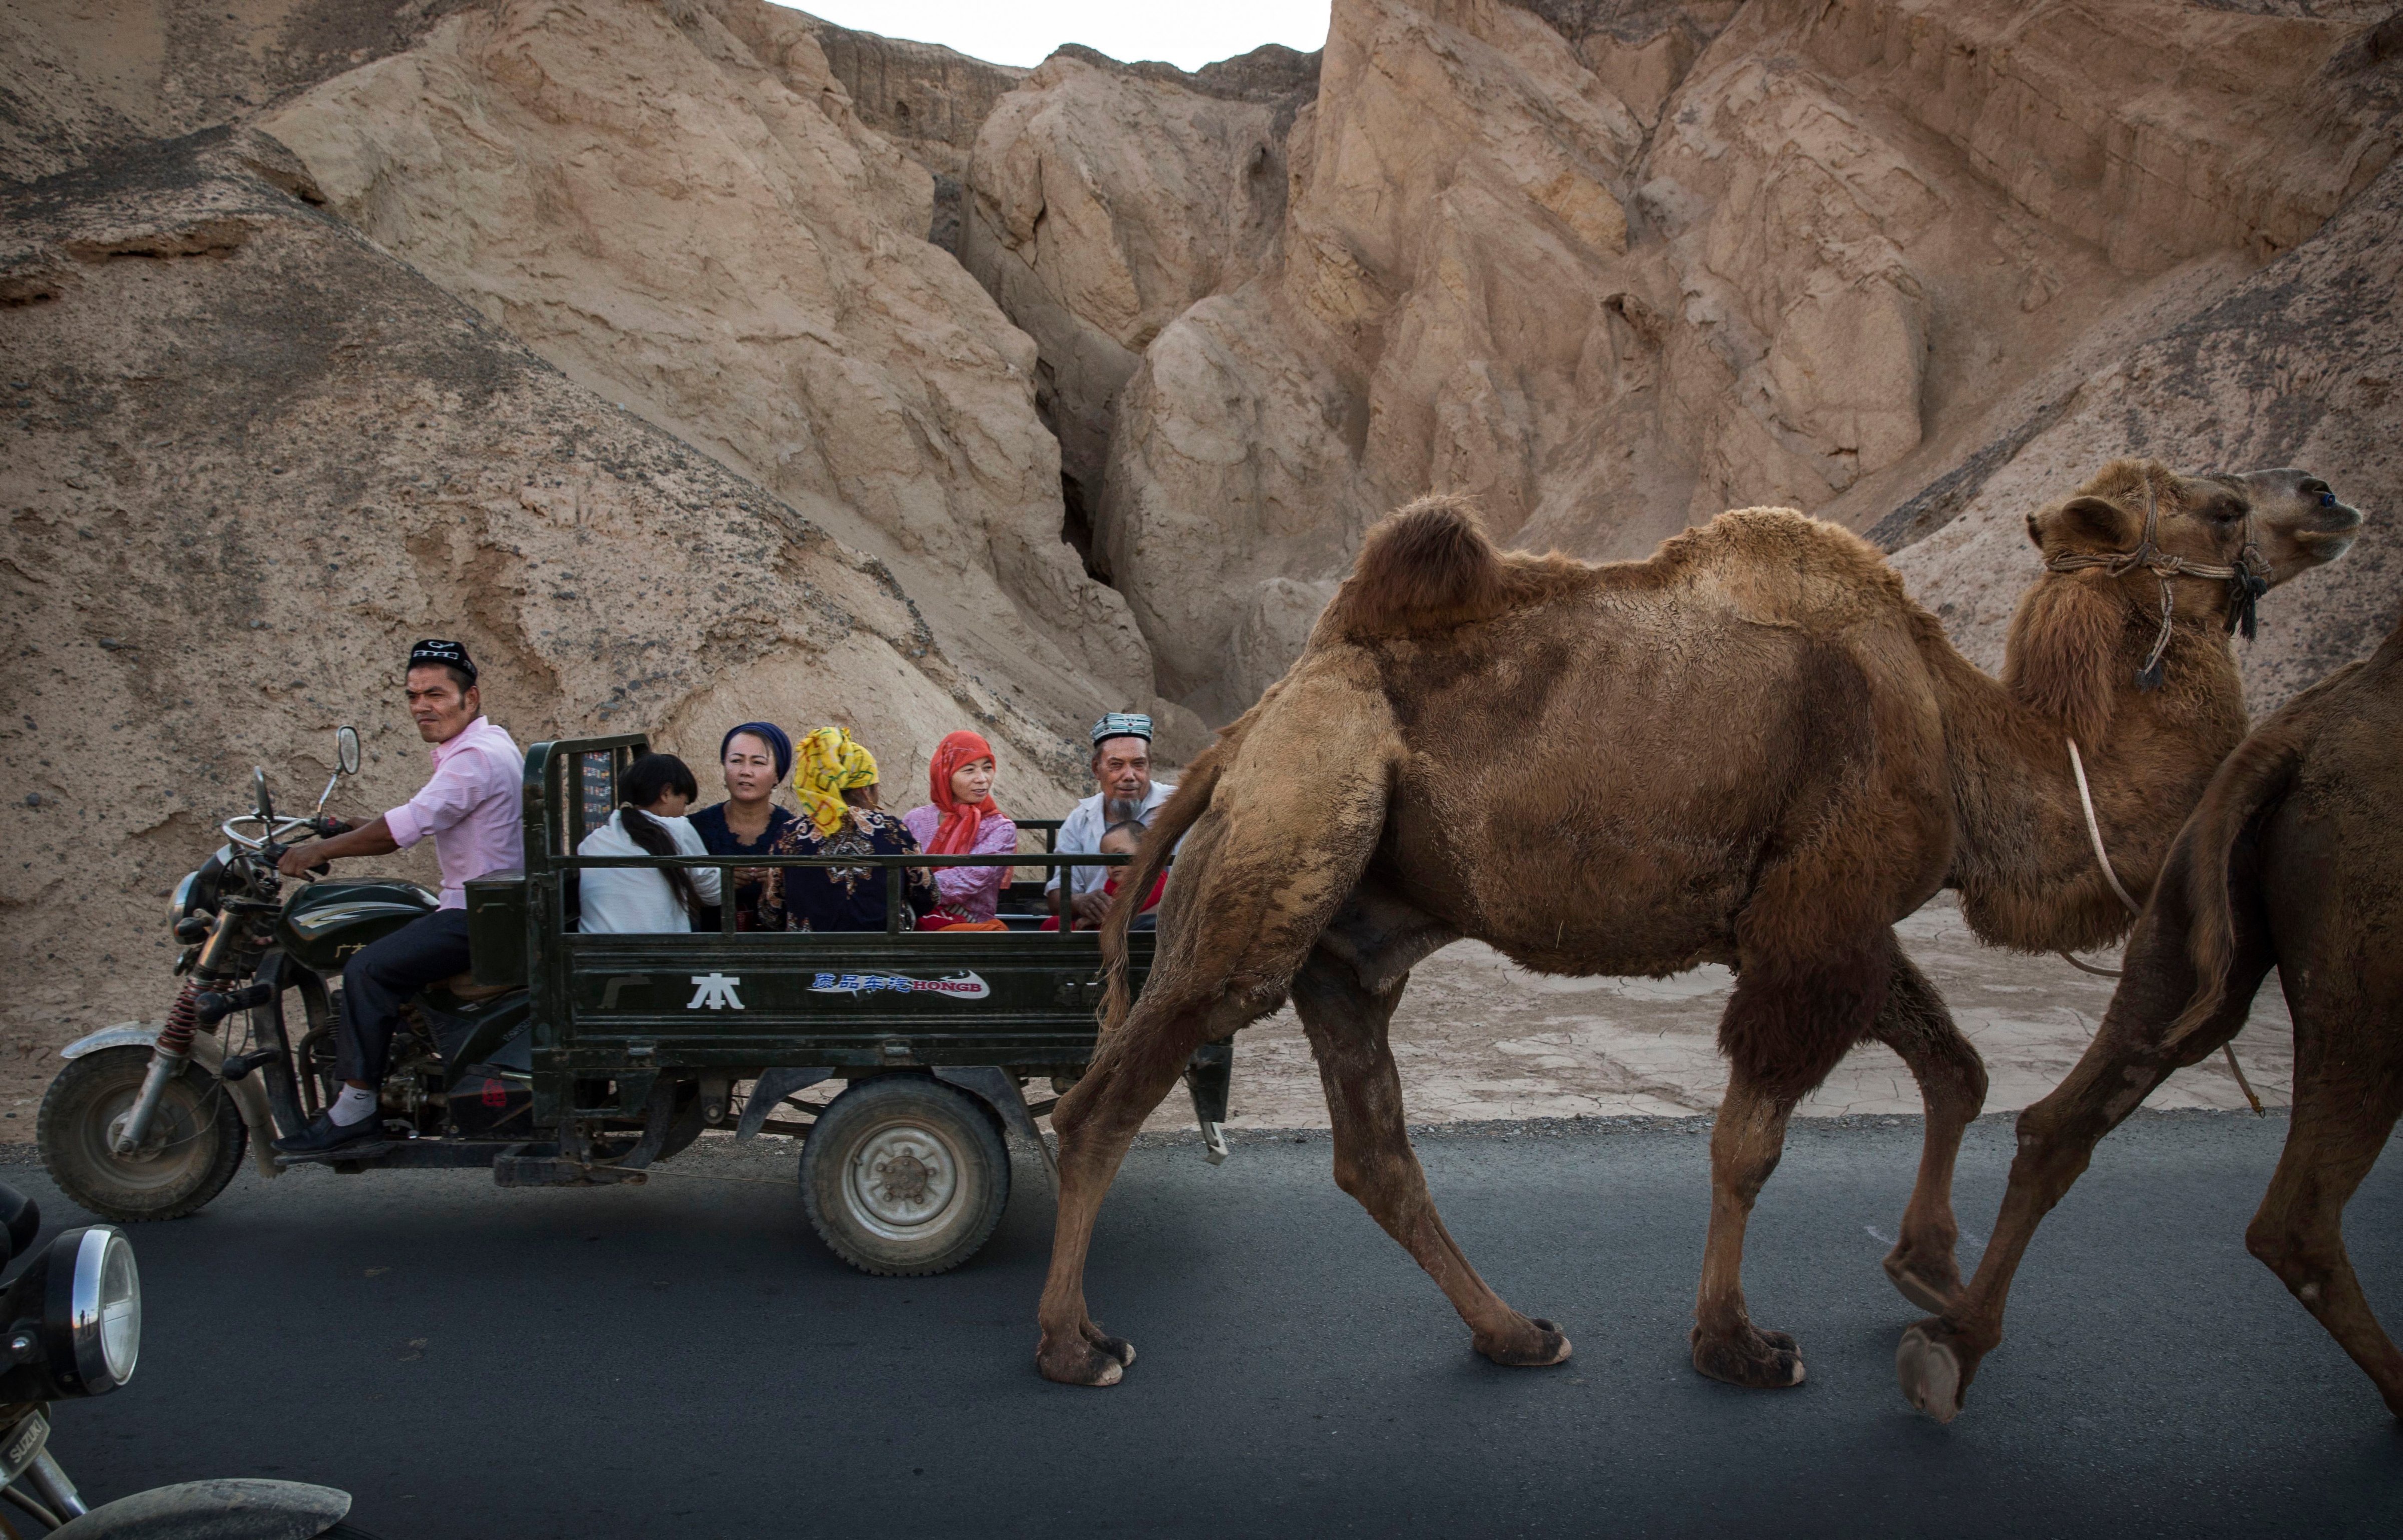 A Uighur family rides past a camel in Turpan county, in China's autonomous region of Xinjiang, on Sept. 12, 2016 (Kevin Frayer—Getty Images)